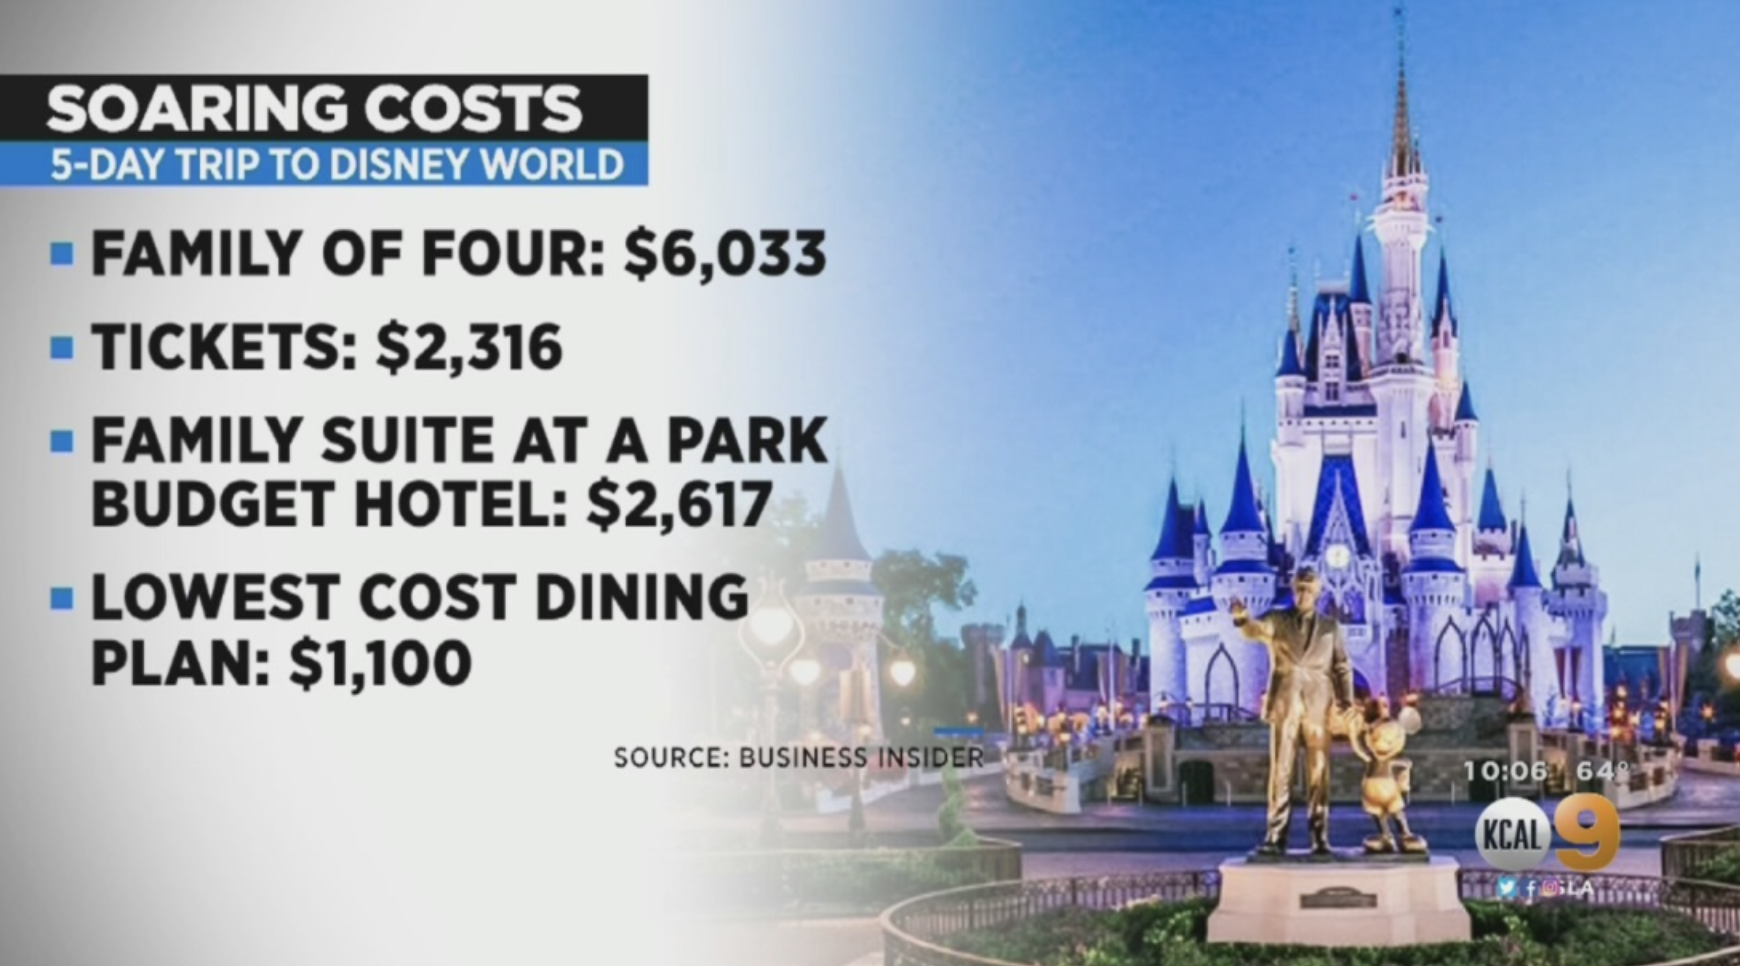 Inexpensive Family Vacations That Cost Less Than Disney World